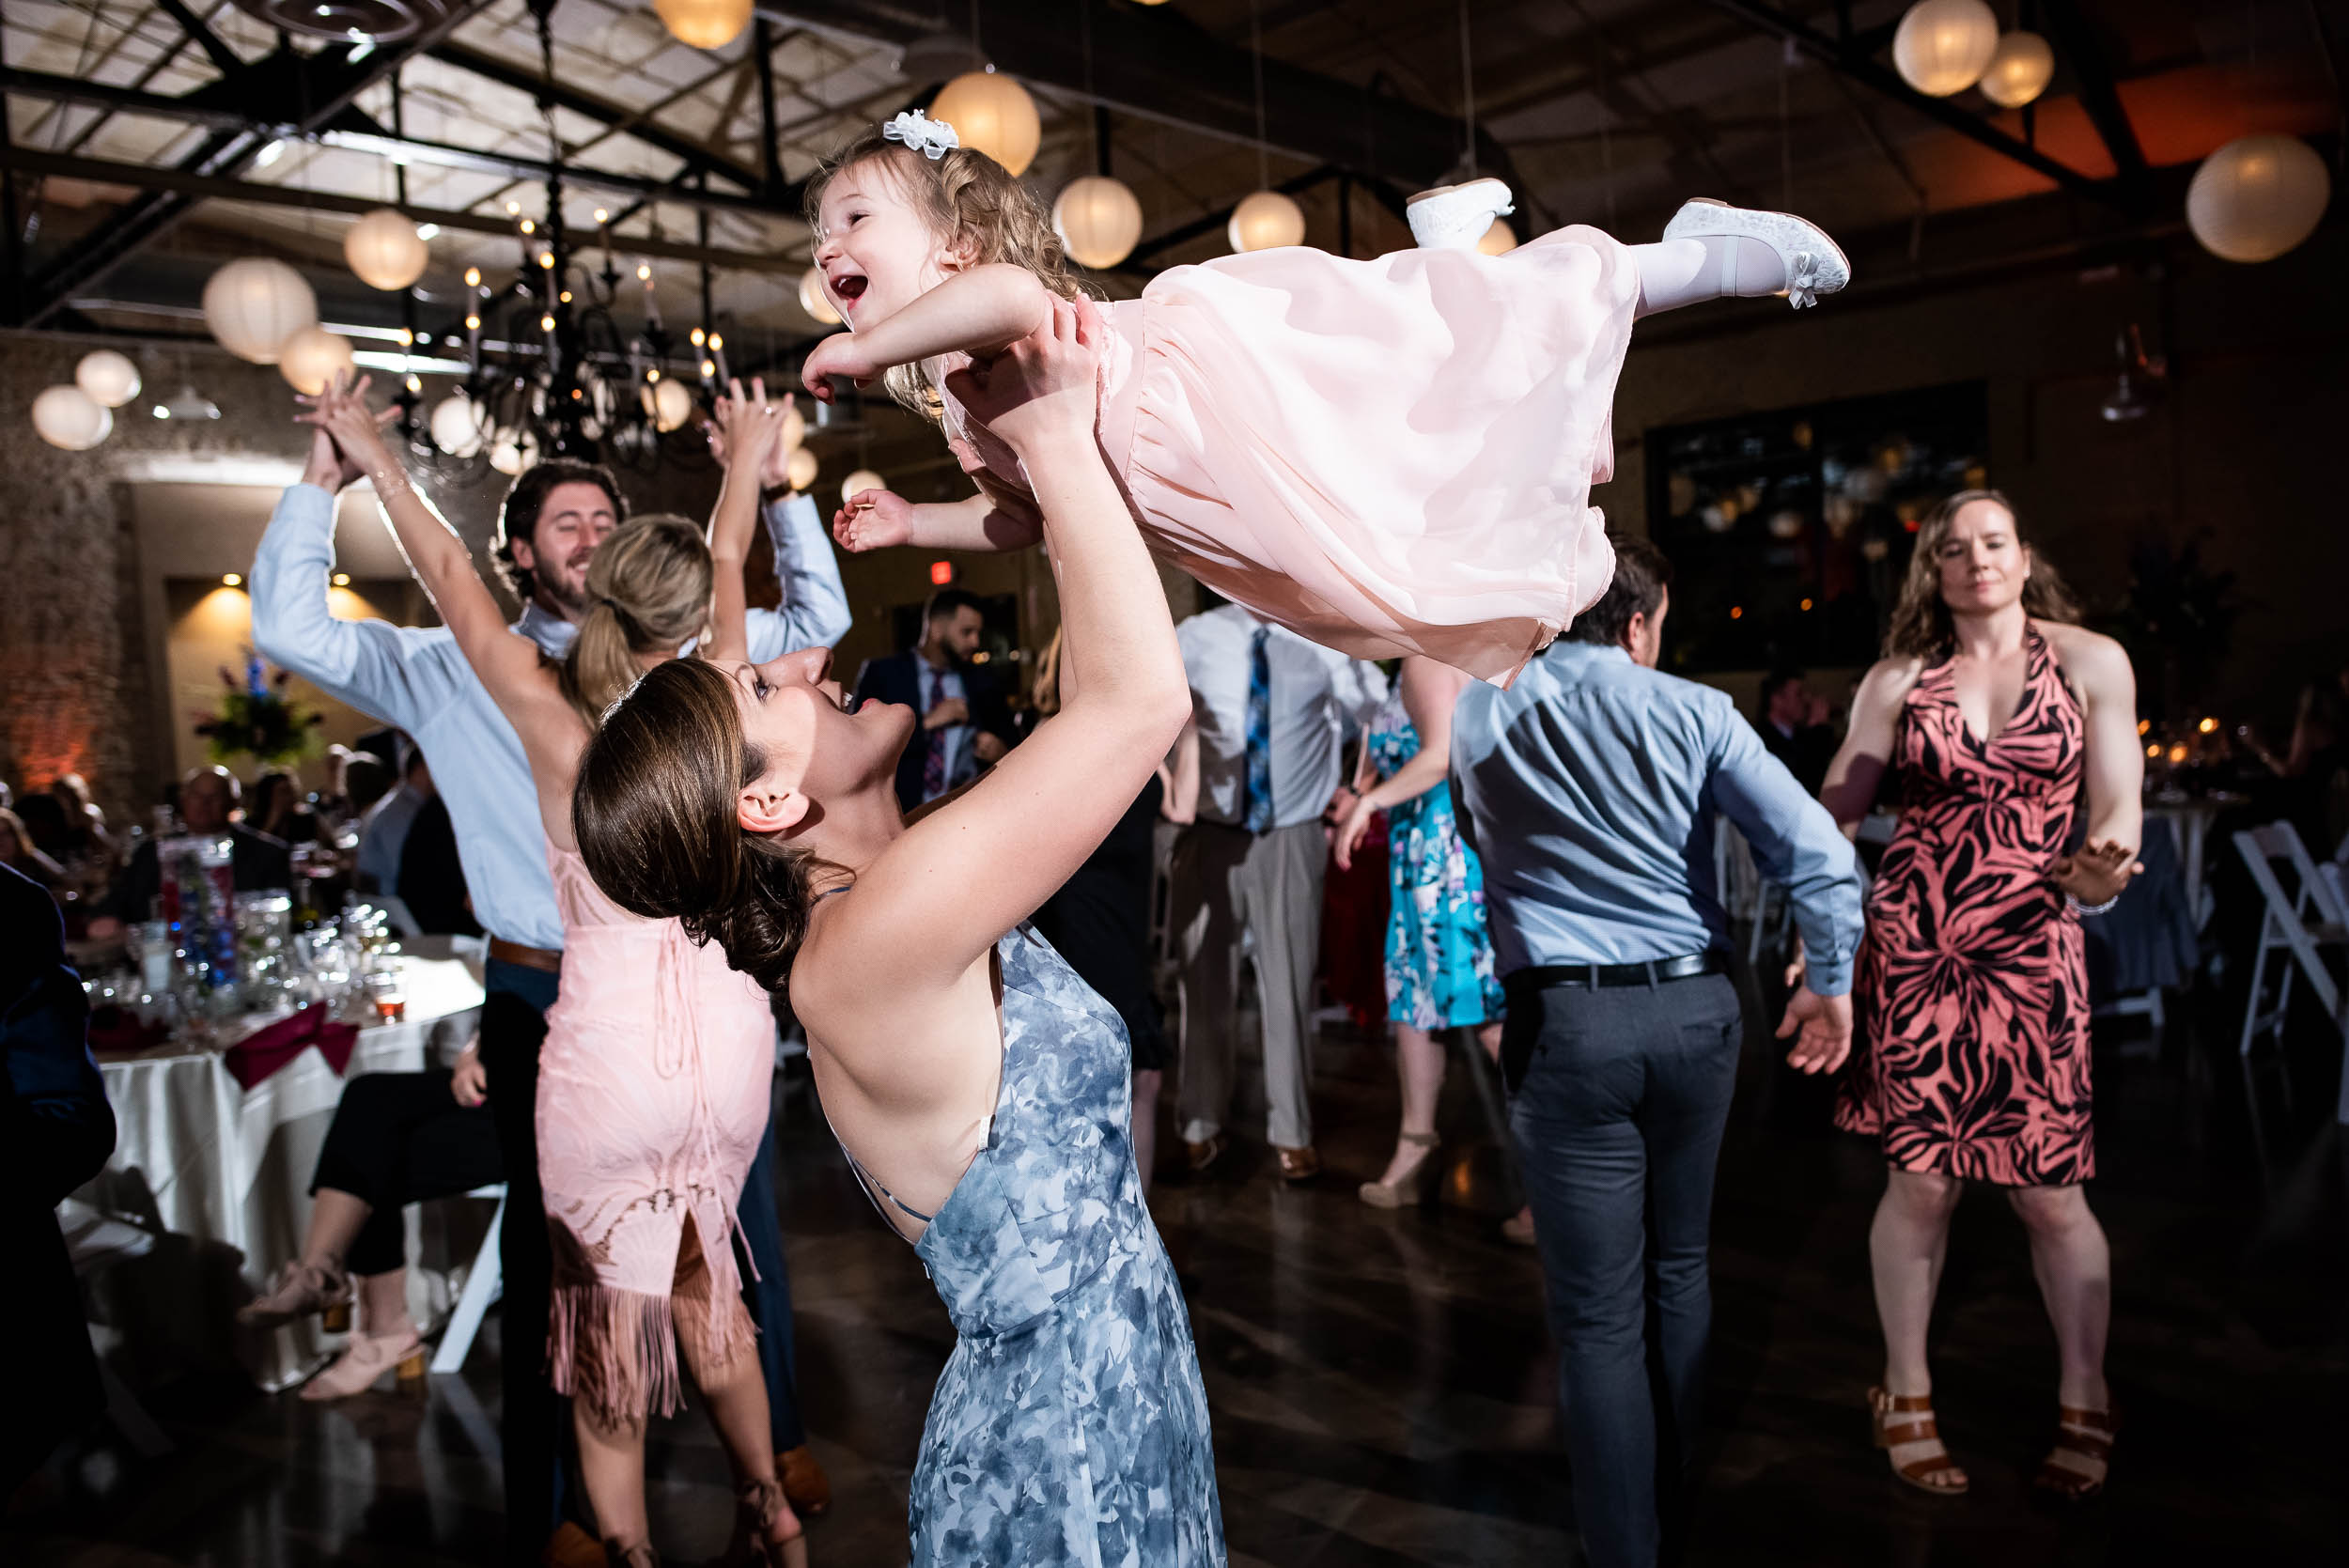 Wedding reception fun: Modern industrial Chicago wedding inside Prairie Street Brewhouse captured by J. Brown Photography. Find more wedding ideas at jbrownphotography.com!